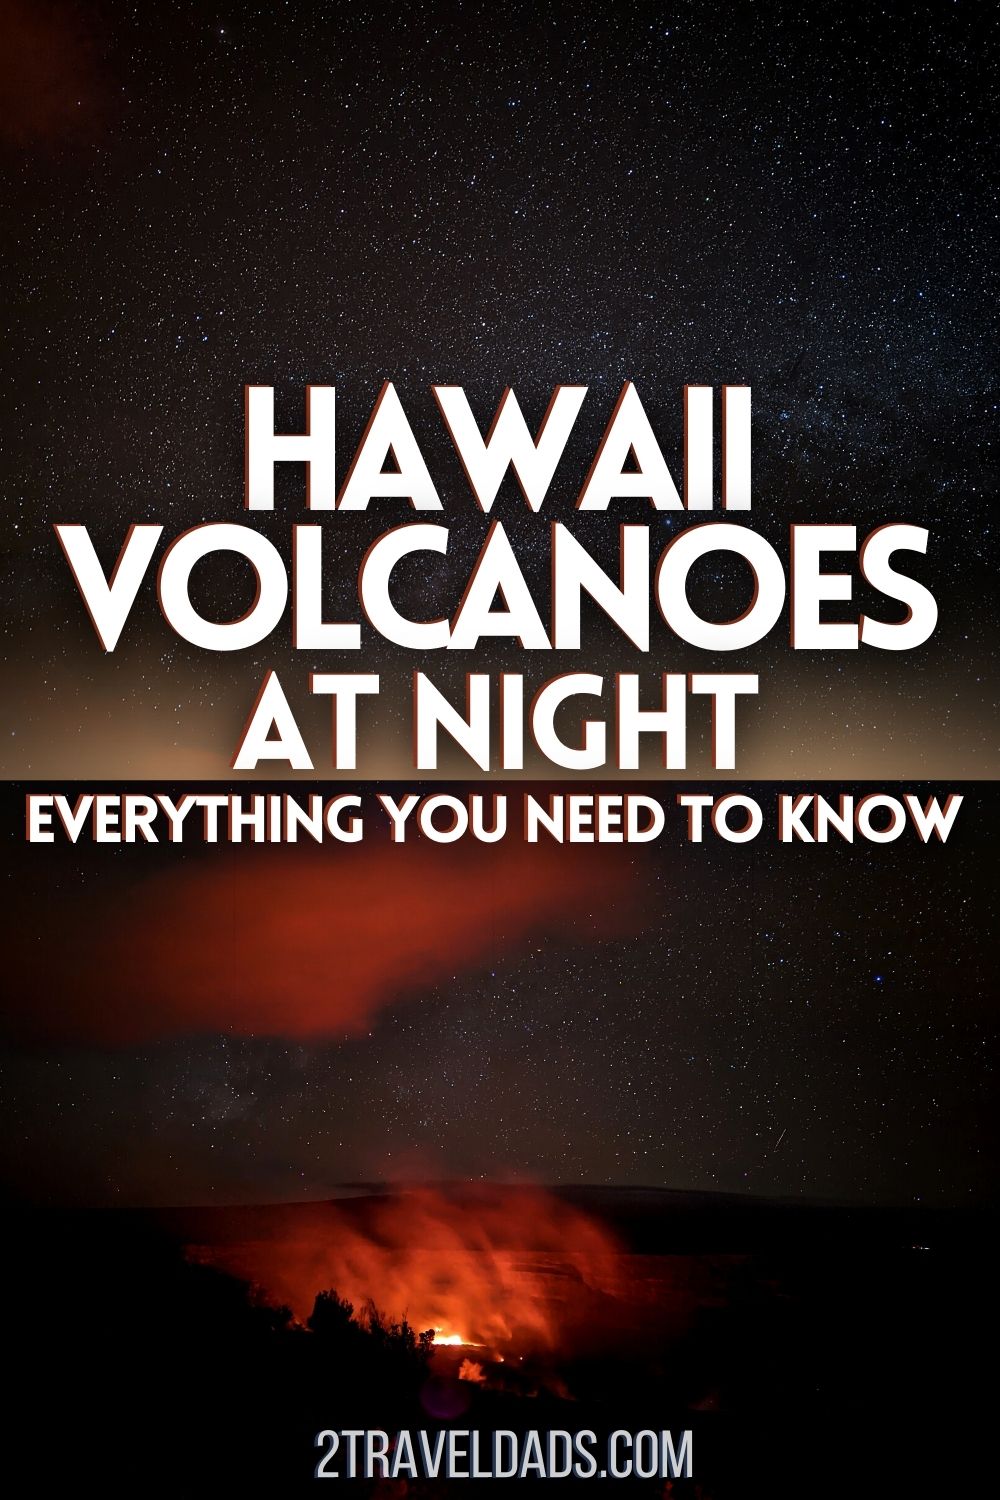 Visiting Hawaii Volcanoes National Park at night for the lava glow is awesome. Everything you need to know to plan a nighttime trip into the park, including where to see flowing lava, how to photograph lava glow and more.